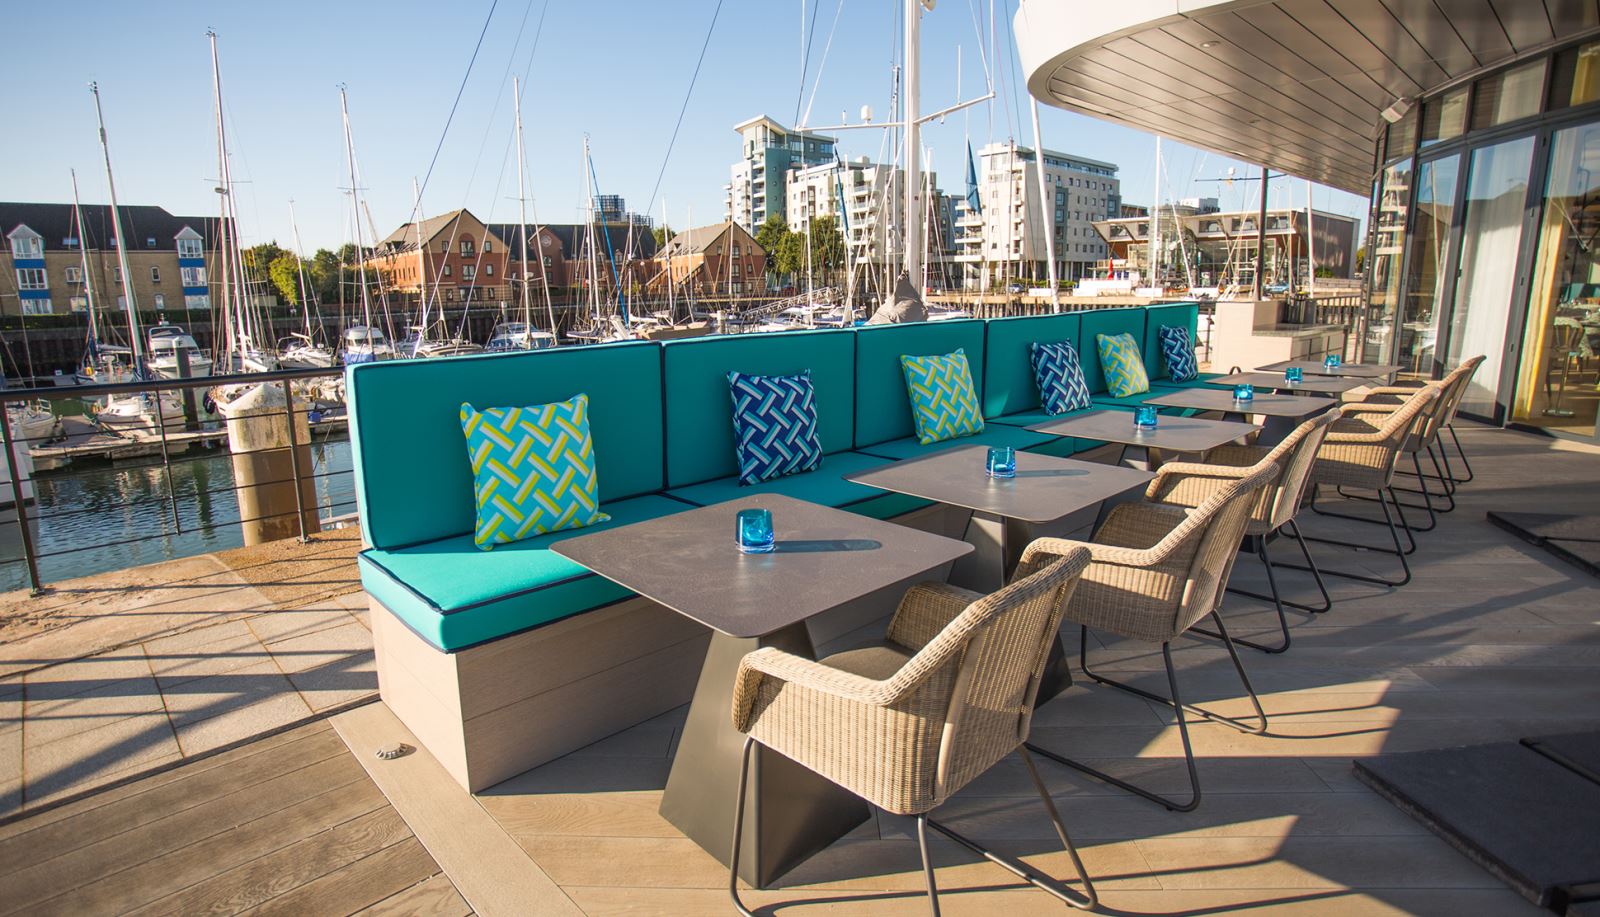 The Outdoor Space at the Jetty Restaurant in Southampton